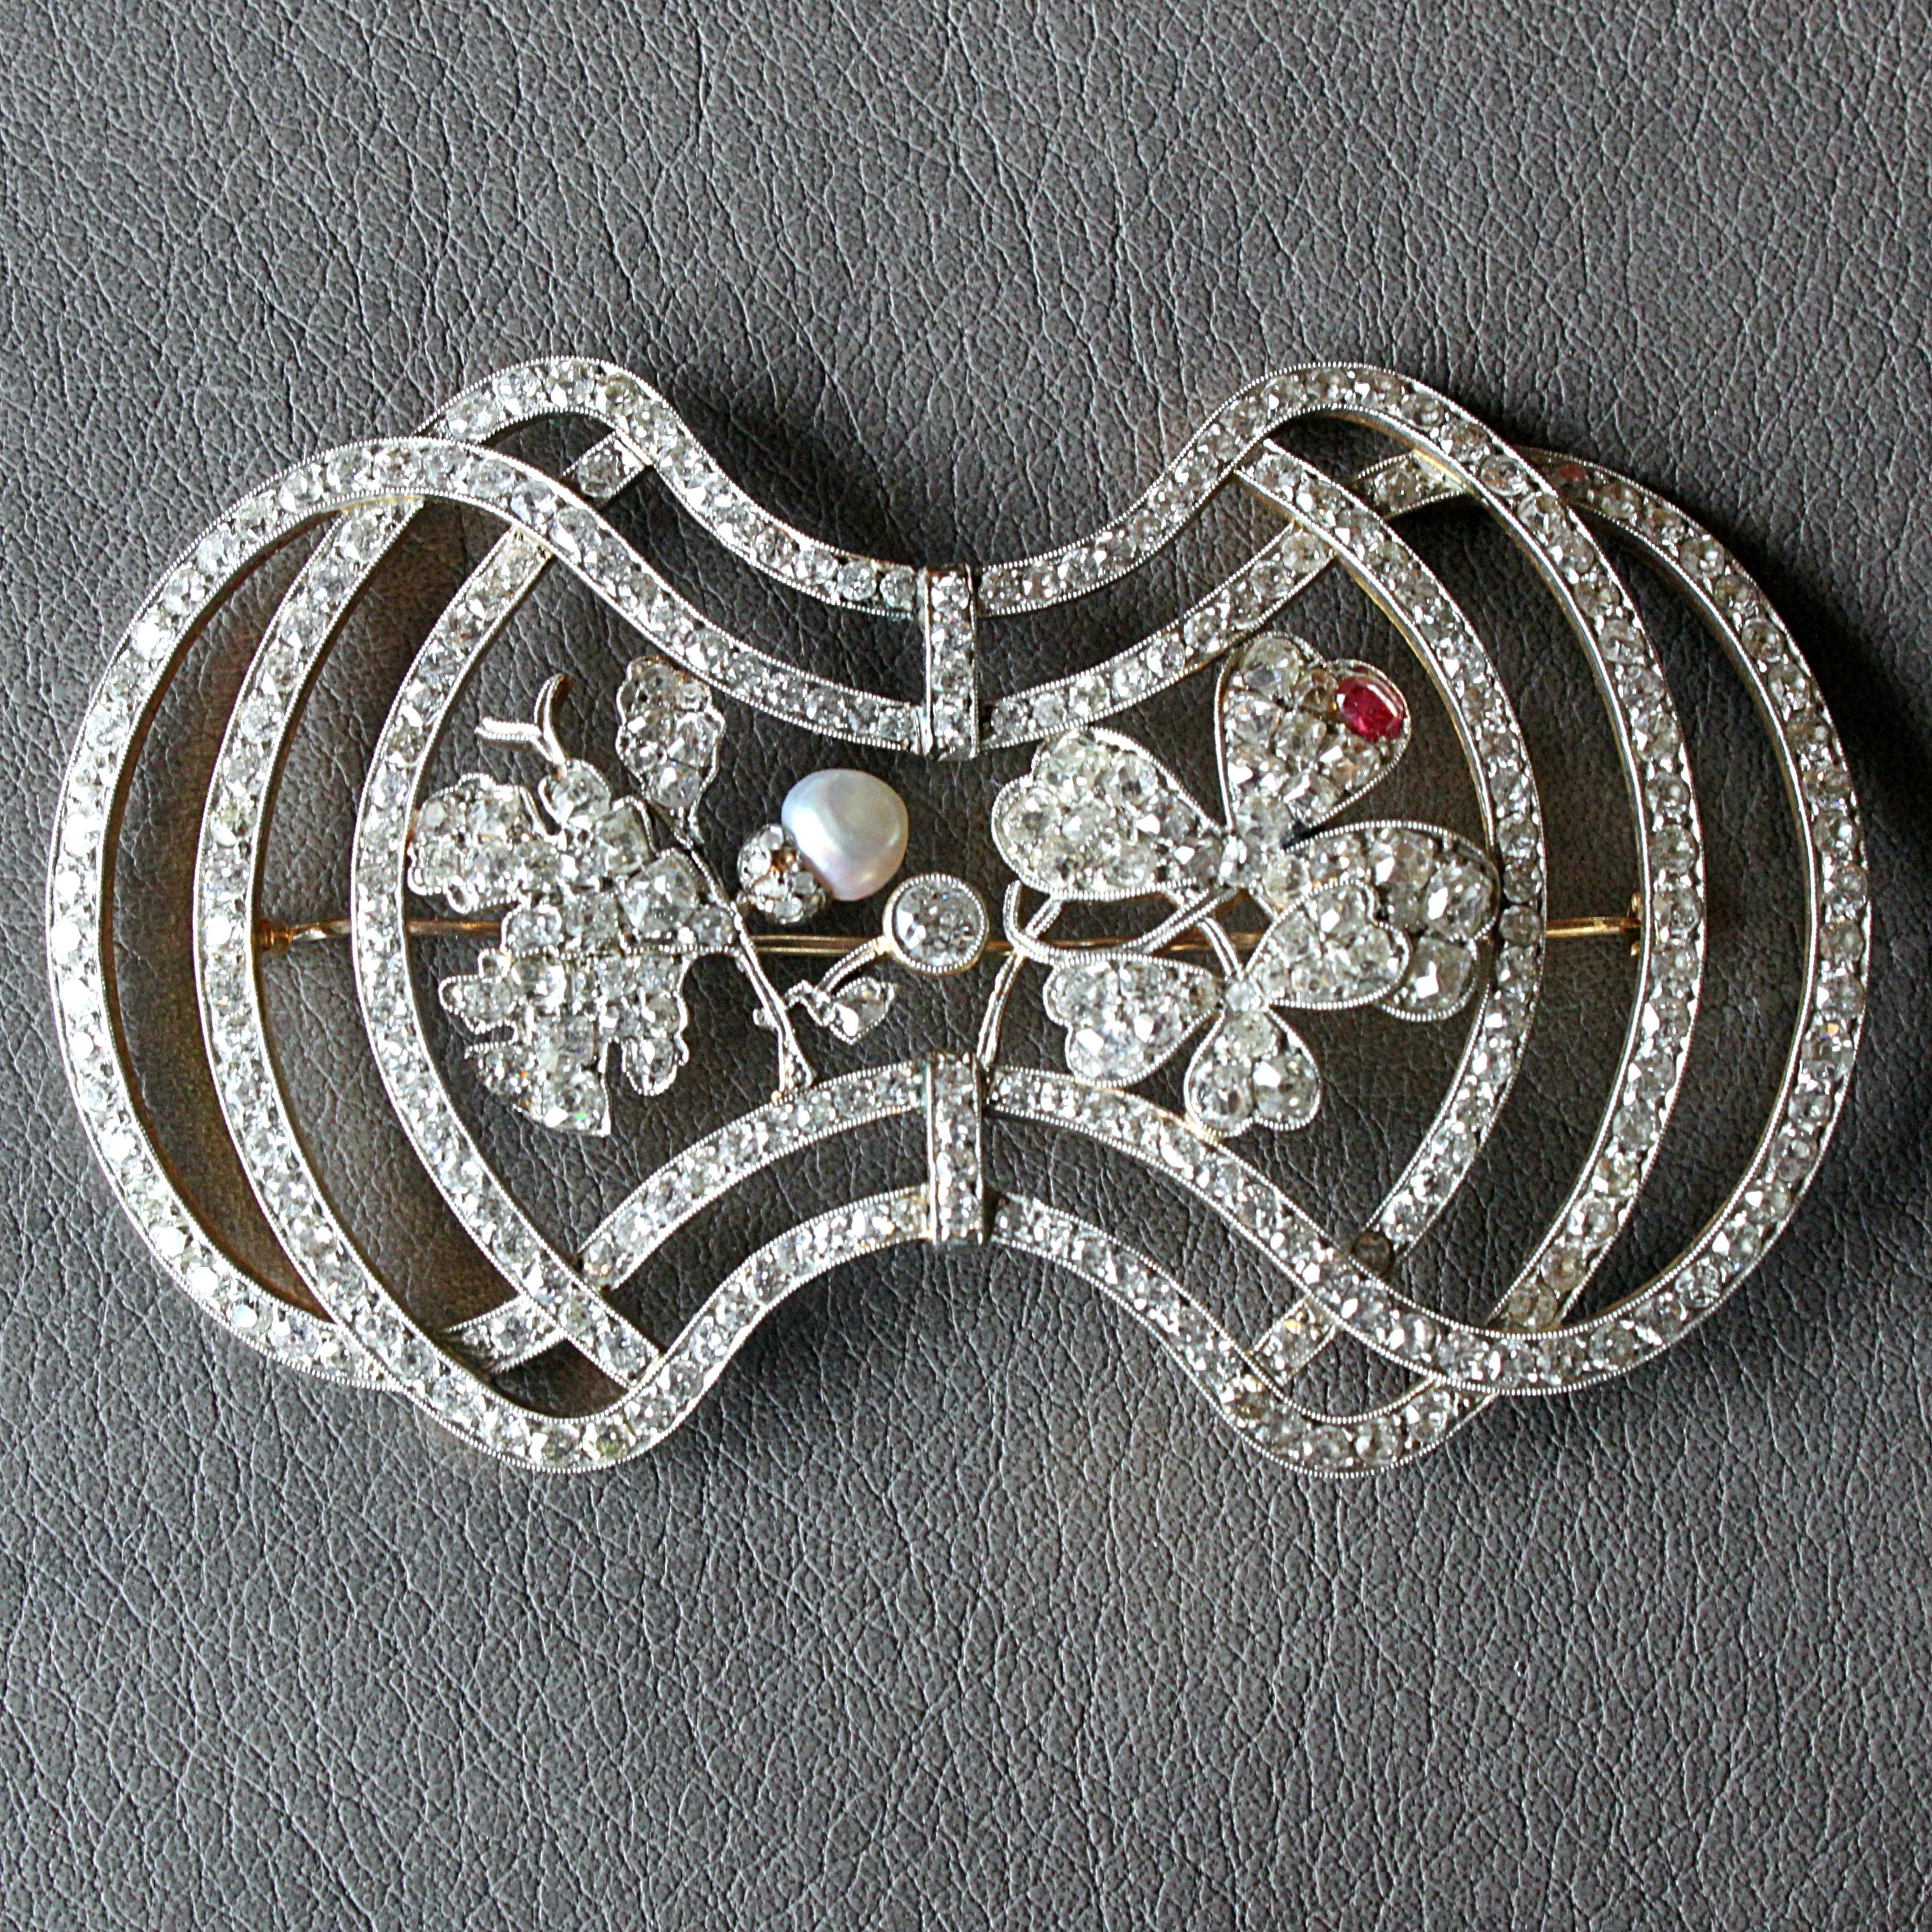 A large diamond, pearl and ruby Art Nouveau brooch in platinum and yellow gold, ca. 1910s. 

It has a beautiful design and with the depiction of an oak leaf and trefoil clover it carries strong symbolism. The brooch is very finely set with numerous